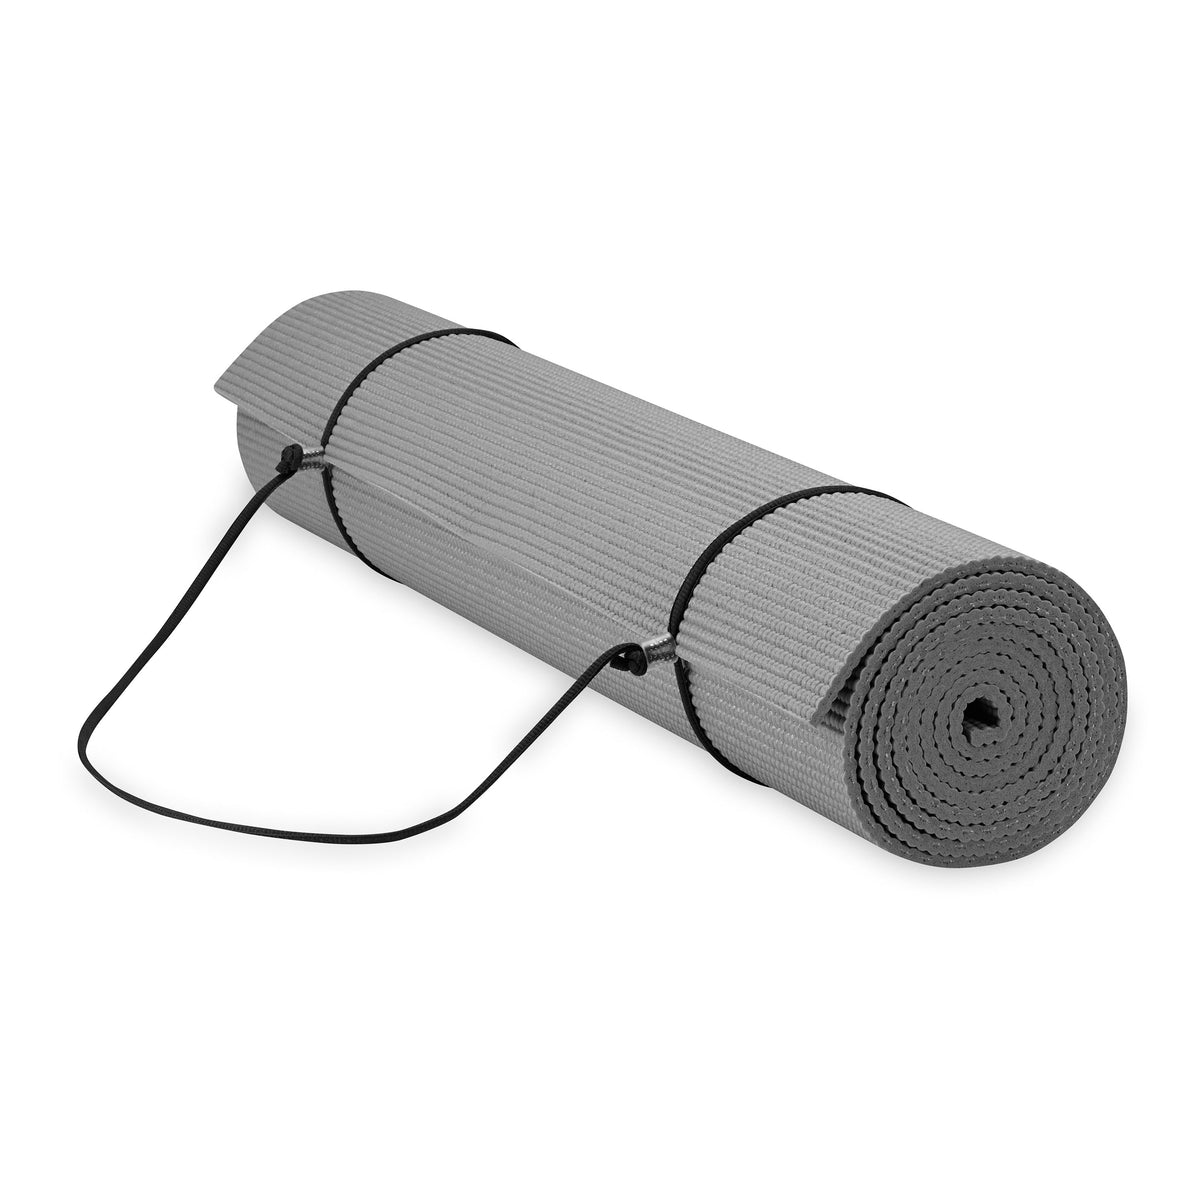 Gaiam Essentials Yoga Mat Grey rolled up with sling